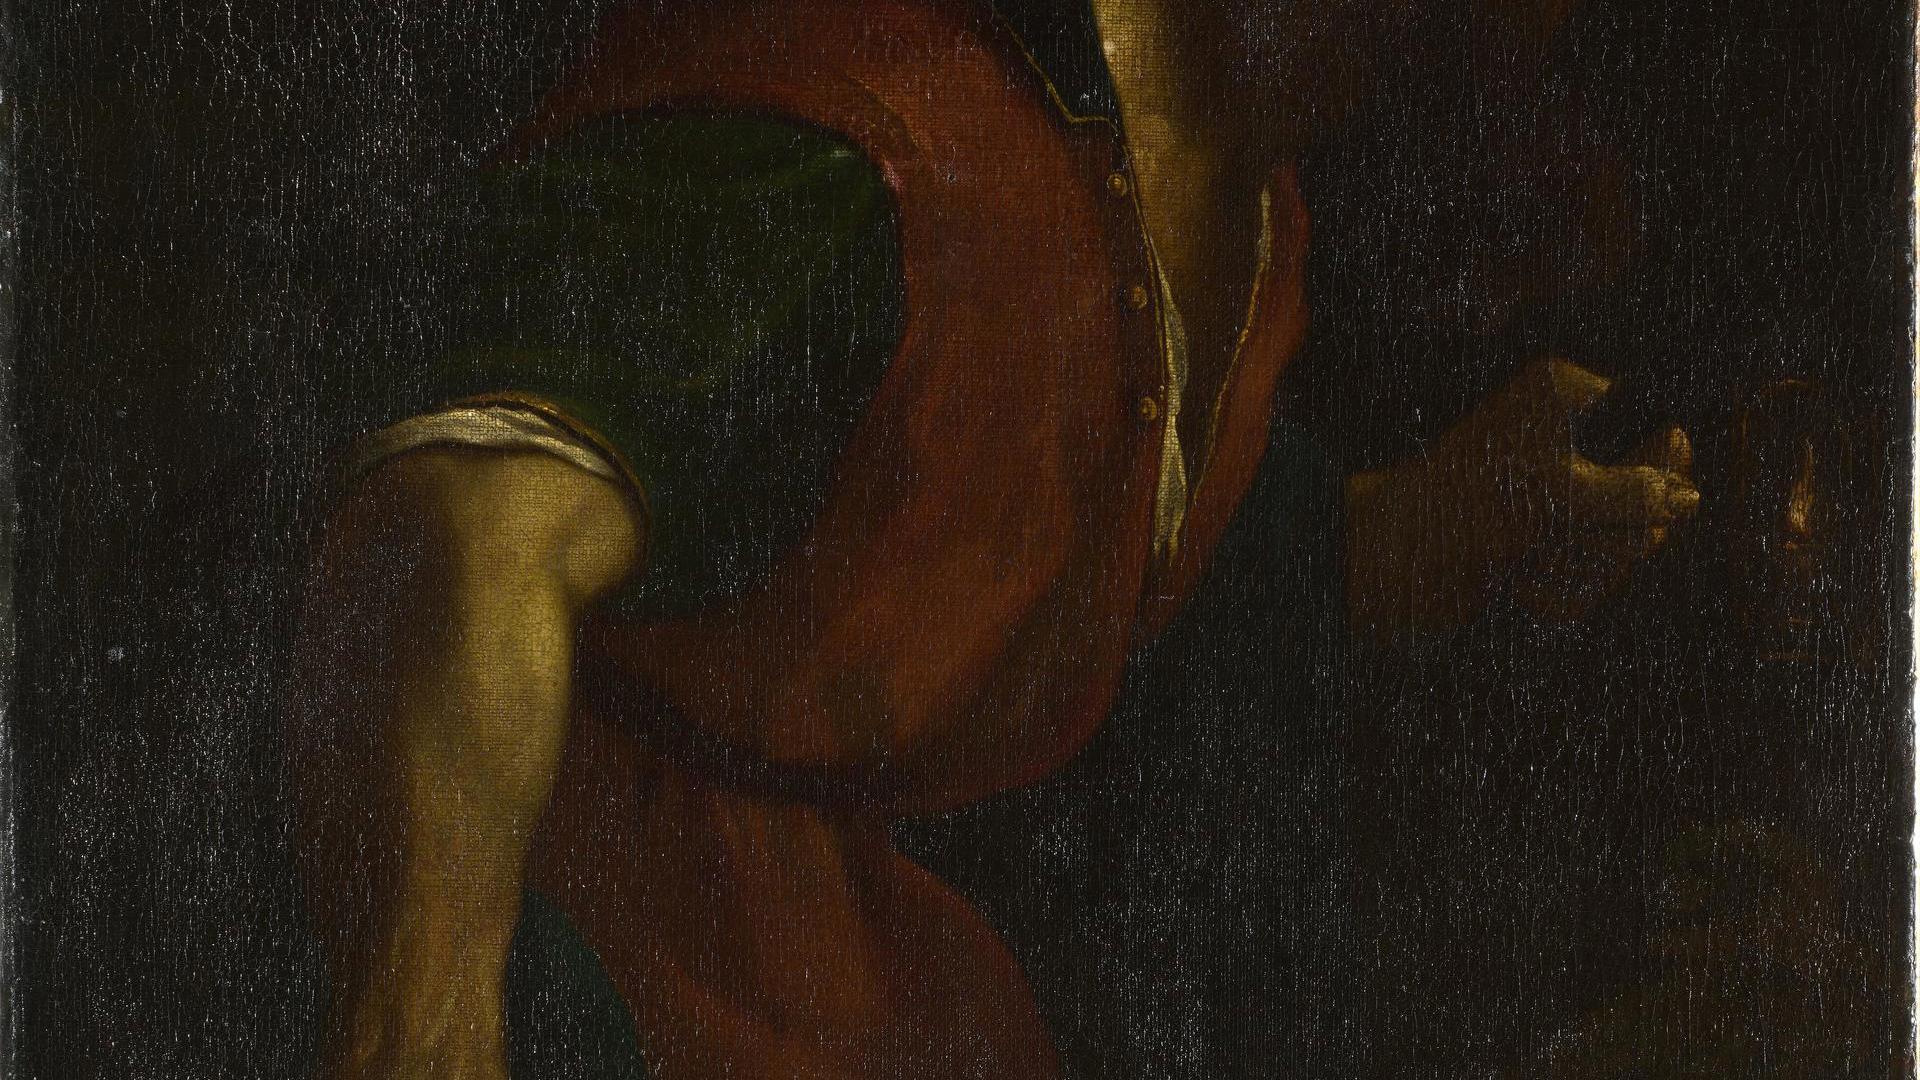 A Bearded Man holding a Lamp by After Guercino